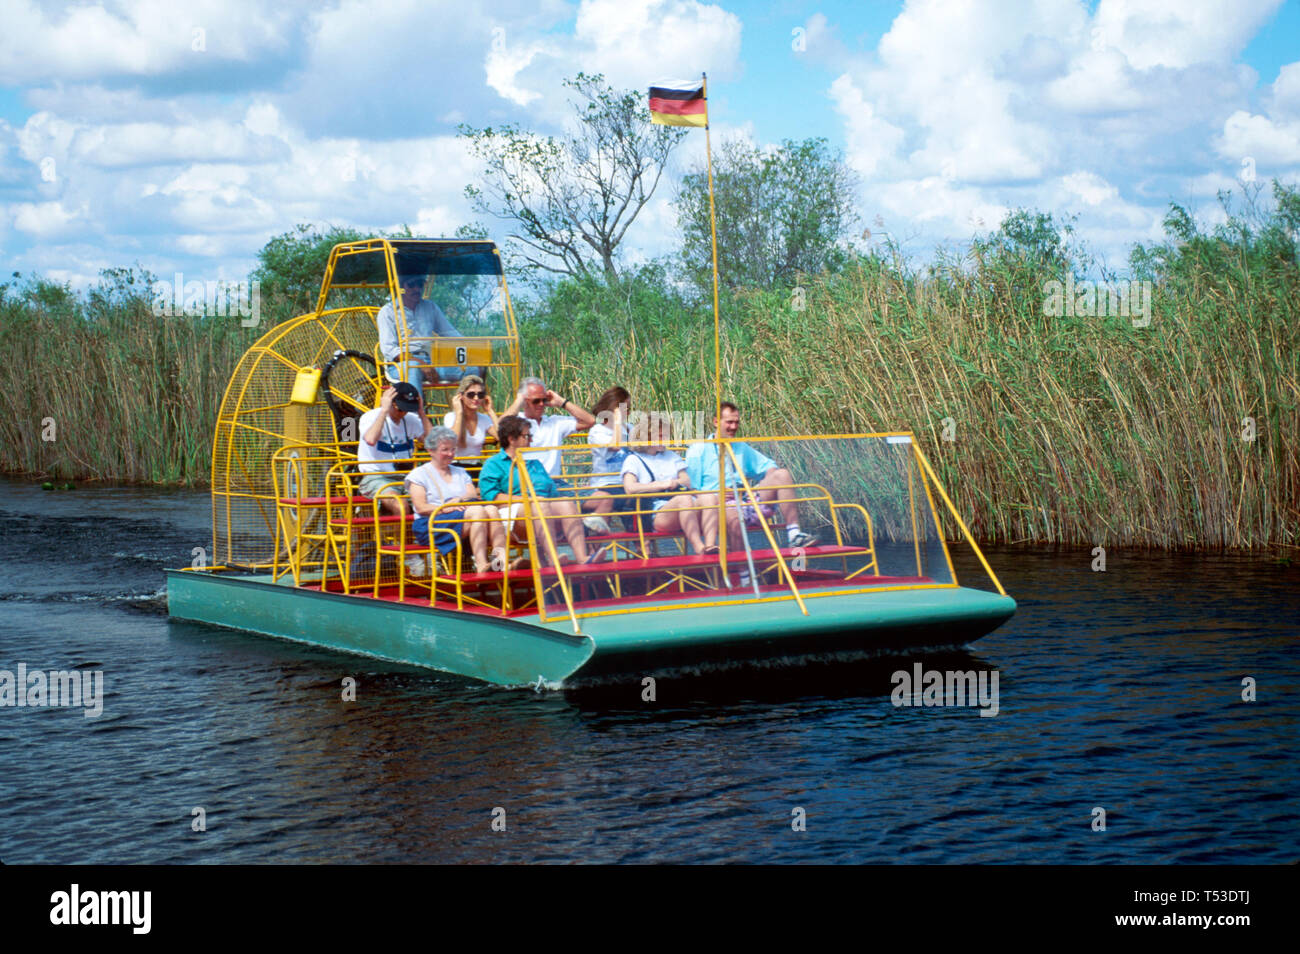 Florida Everglades Miccosukee Seminole Indian Reservation,airboat tour ride riders Tamiami Trail US highway Route 41,visitors sightseeing, Stock Photo